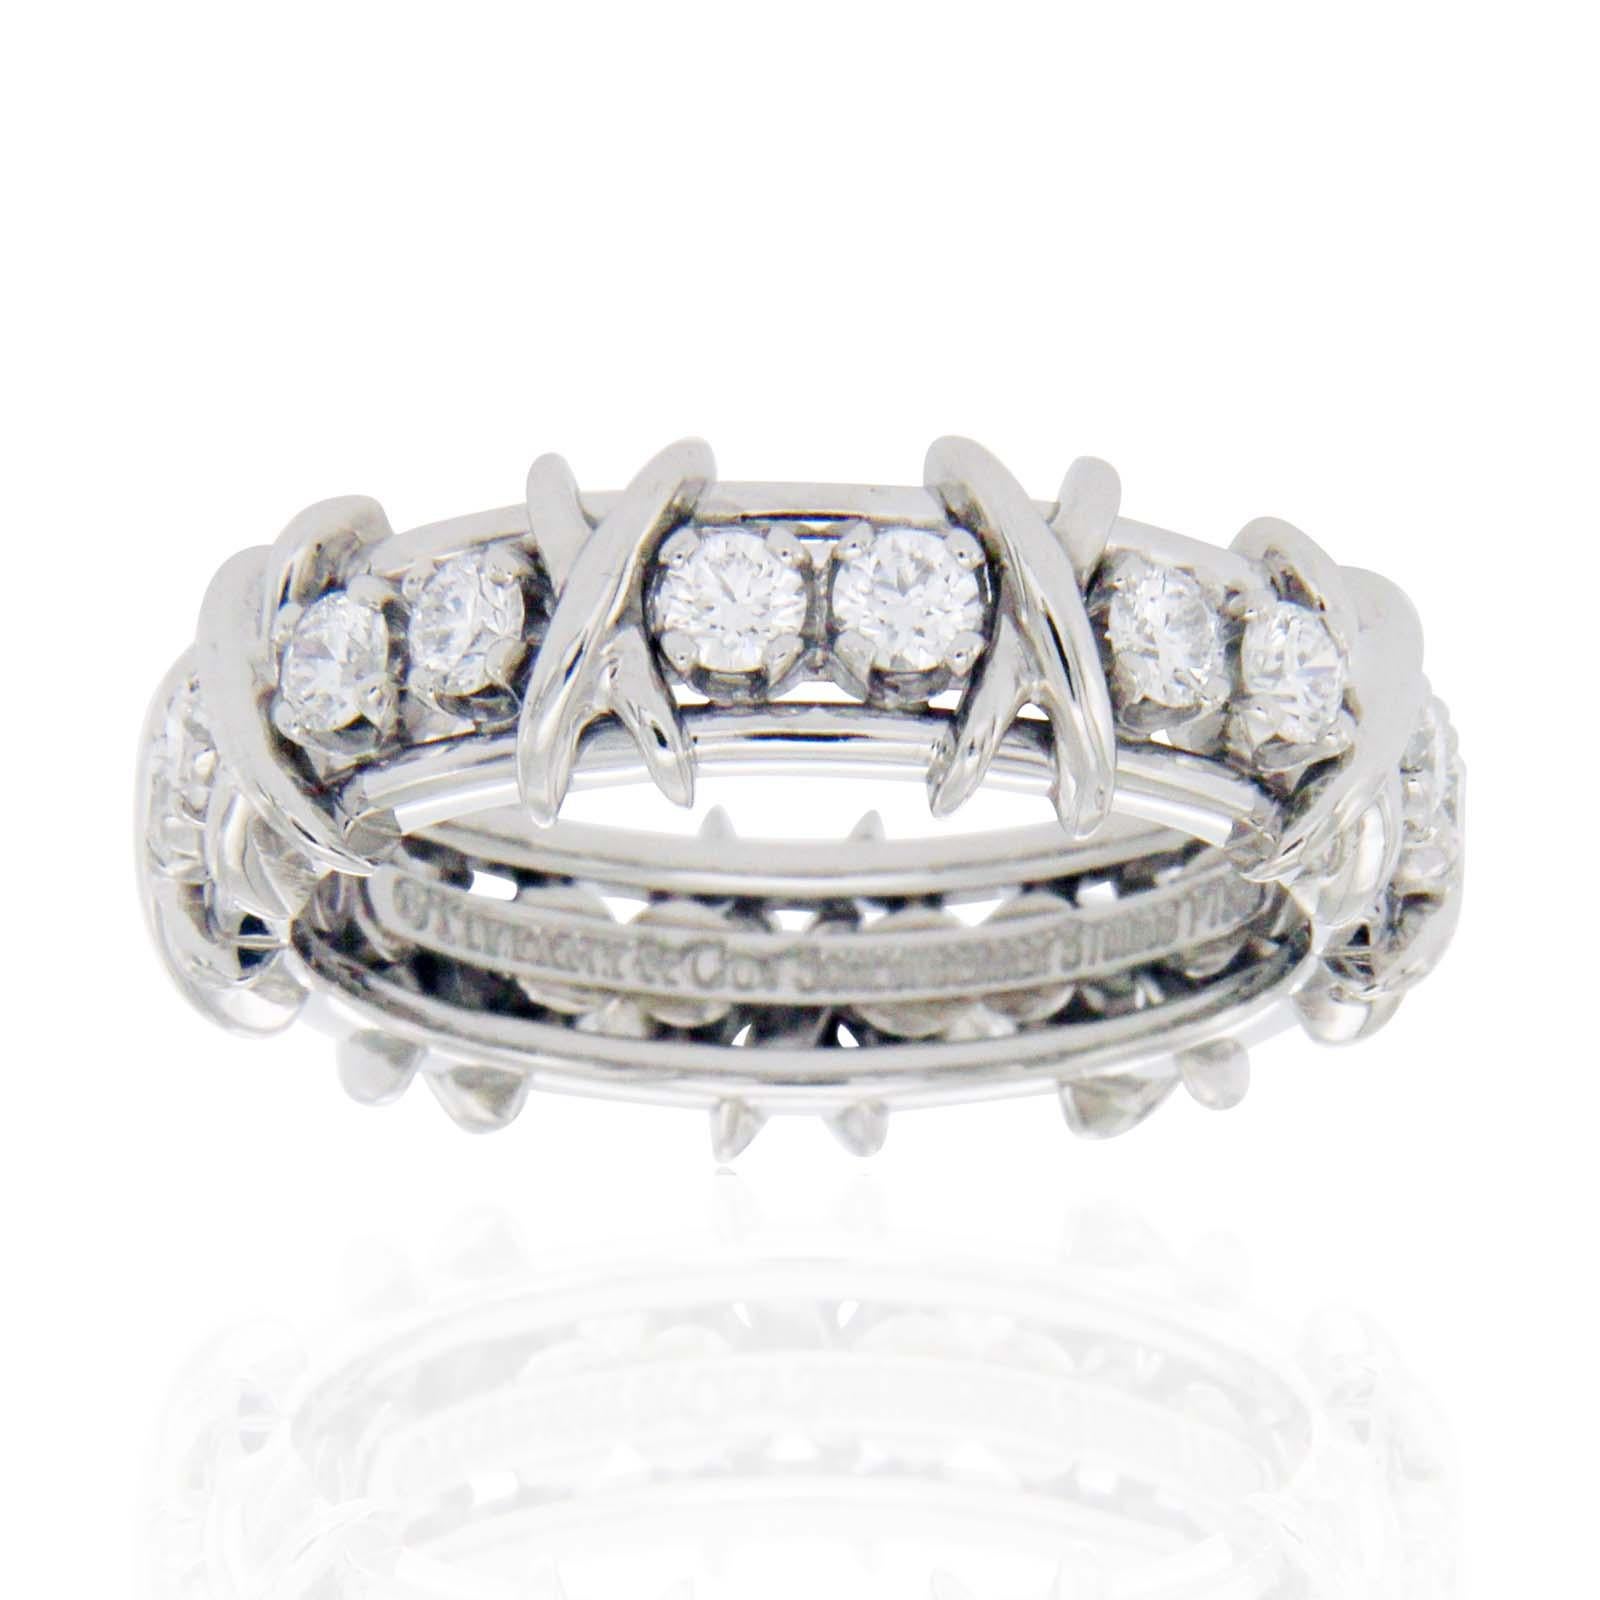 Type: Ring
Top: 7.5 mm
Band Width: 7.5 mm
Metal: Platinum
Metal Purity: 950
Size:10
Hallmarks: Tiffany & Co Schlumberger Studios P950
Total Weight: 12.8 Grams
Stone Type: Diamonds
Condition: Pre Owned
Stock Number: U314